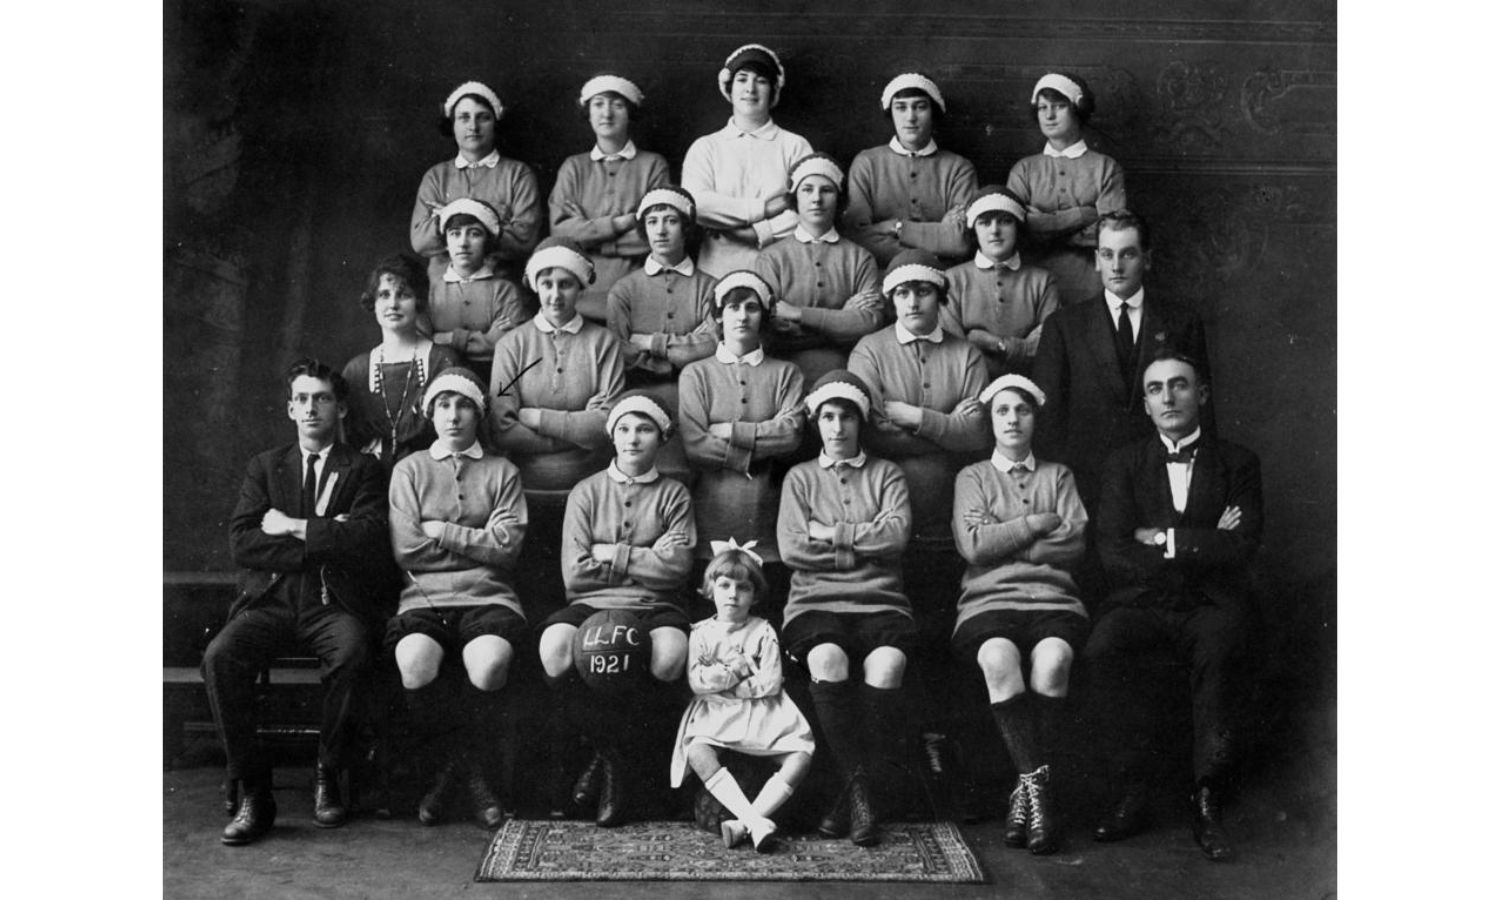 An image of the Latrobe Ladies Football Club, one of the earliest womens football clubs in australia